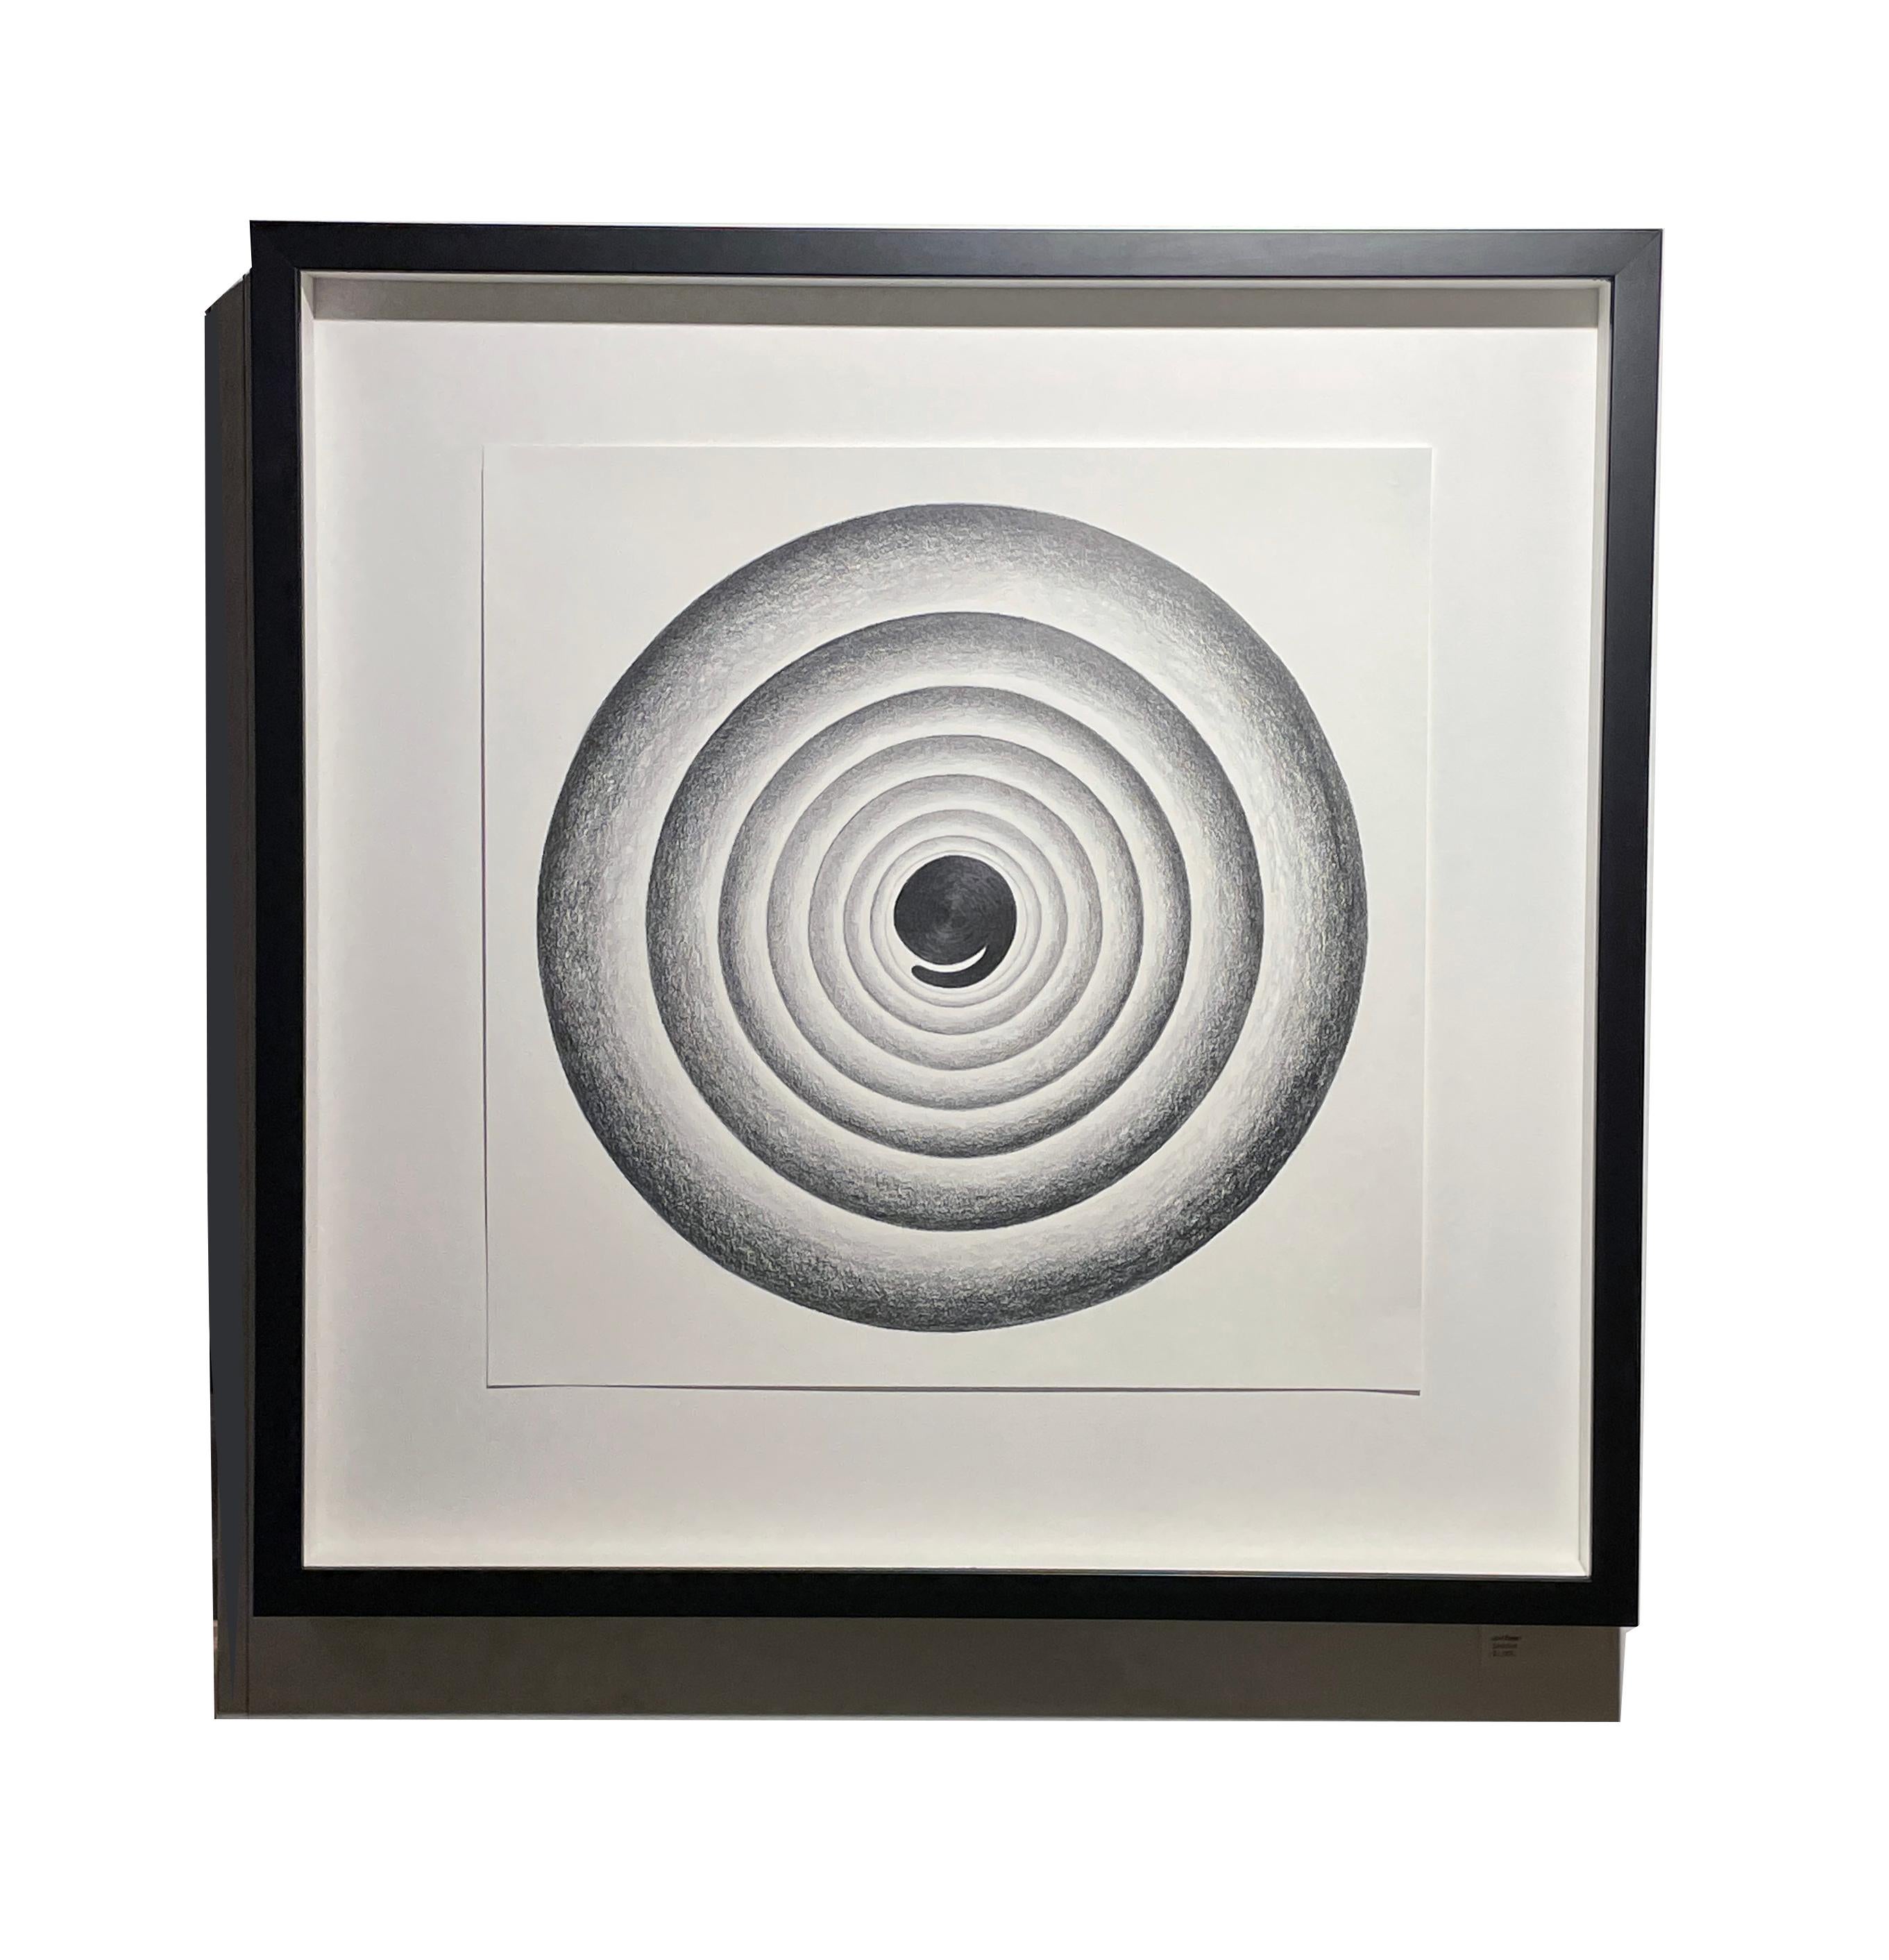 Set of Three Geometric Circular Abstractions , Graphite on Paper, Framed 2